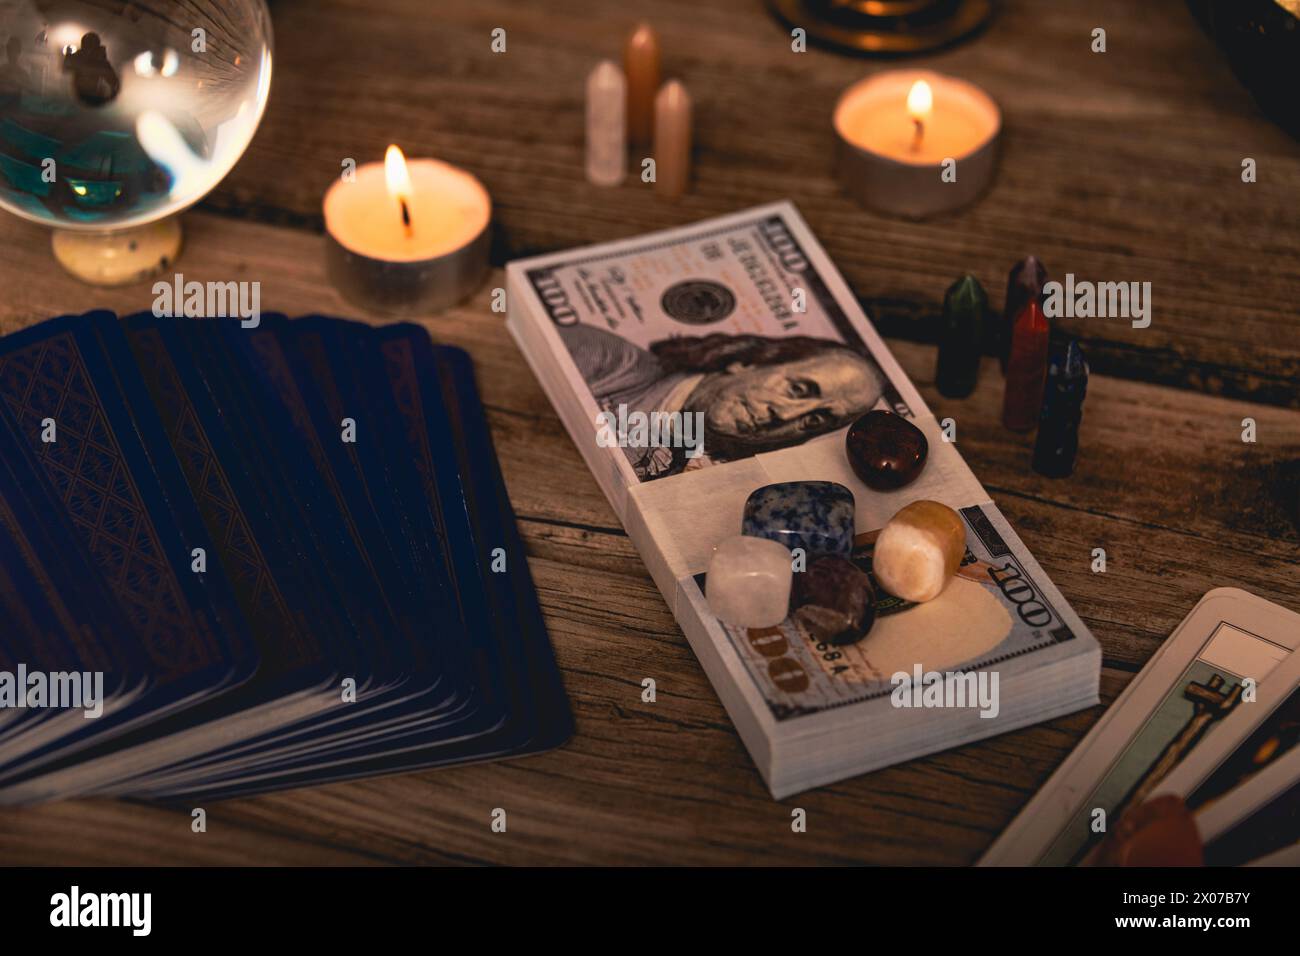 A tarot spread with The Fool card, hundred-dollar bills, and various crystals on a rustic wooden background with candles. Stock Photo